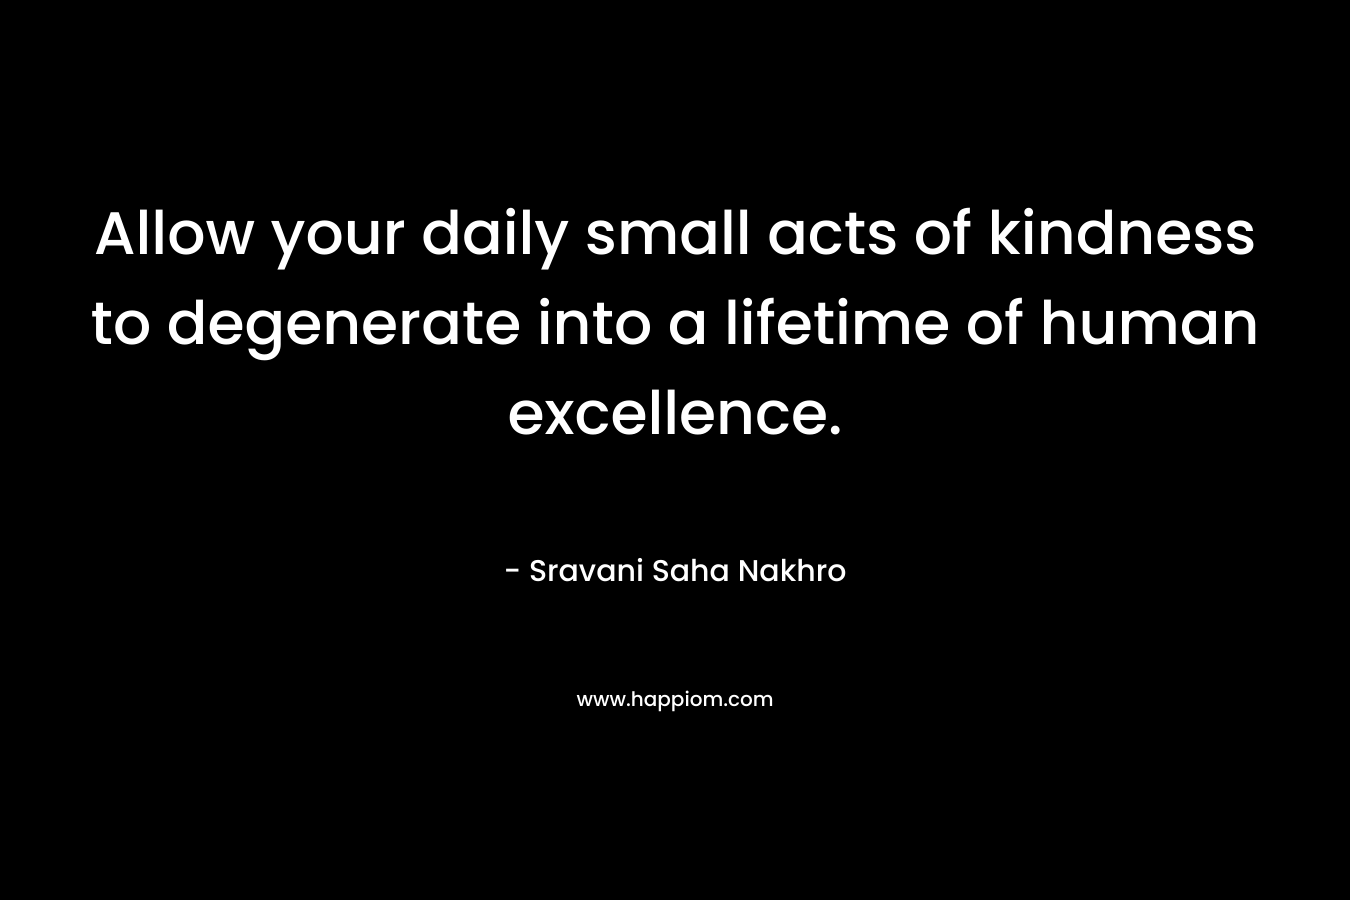 Allow your daily small acts of kindness to degenerate into a lifetime of human excellence.